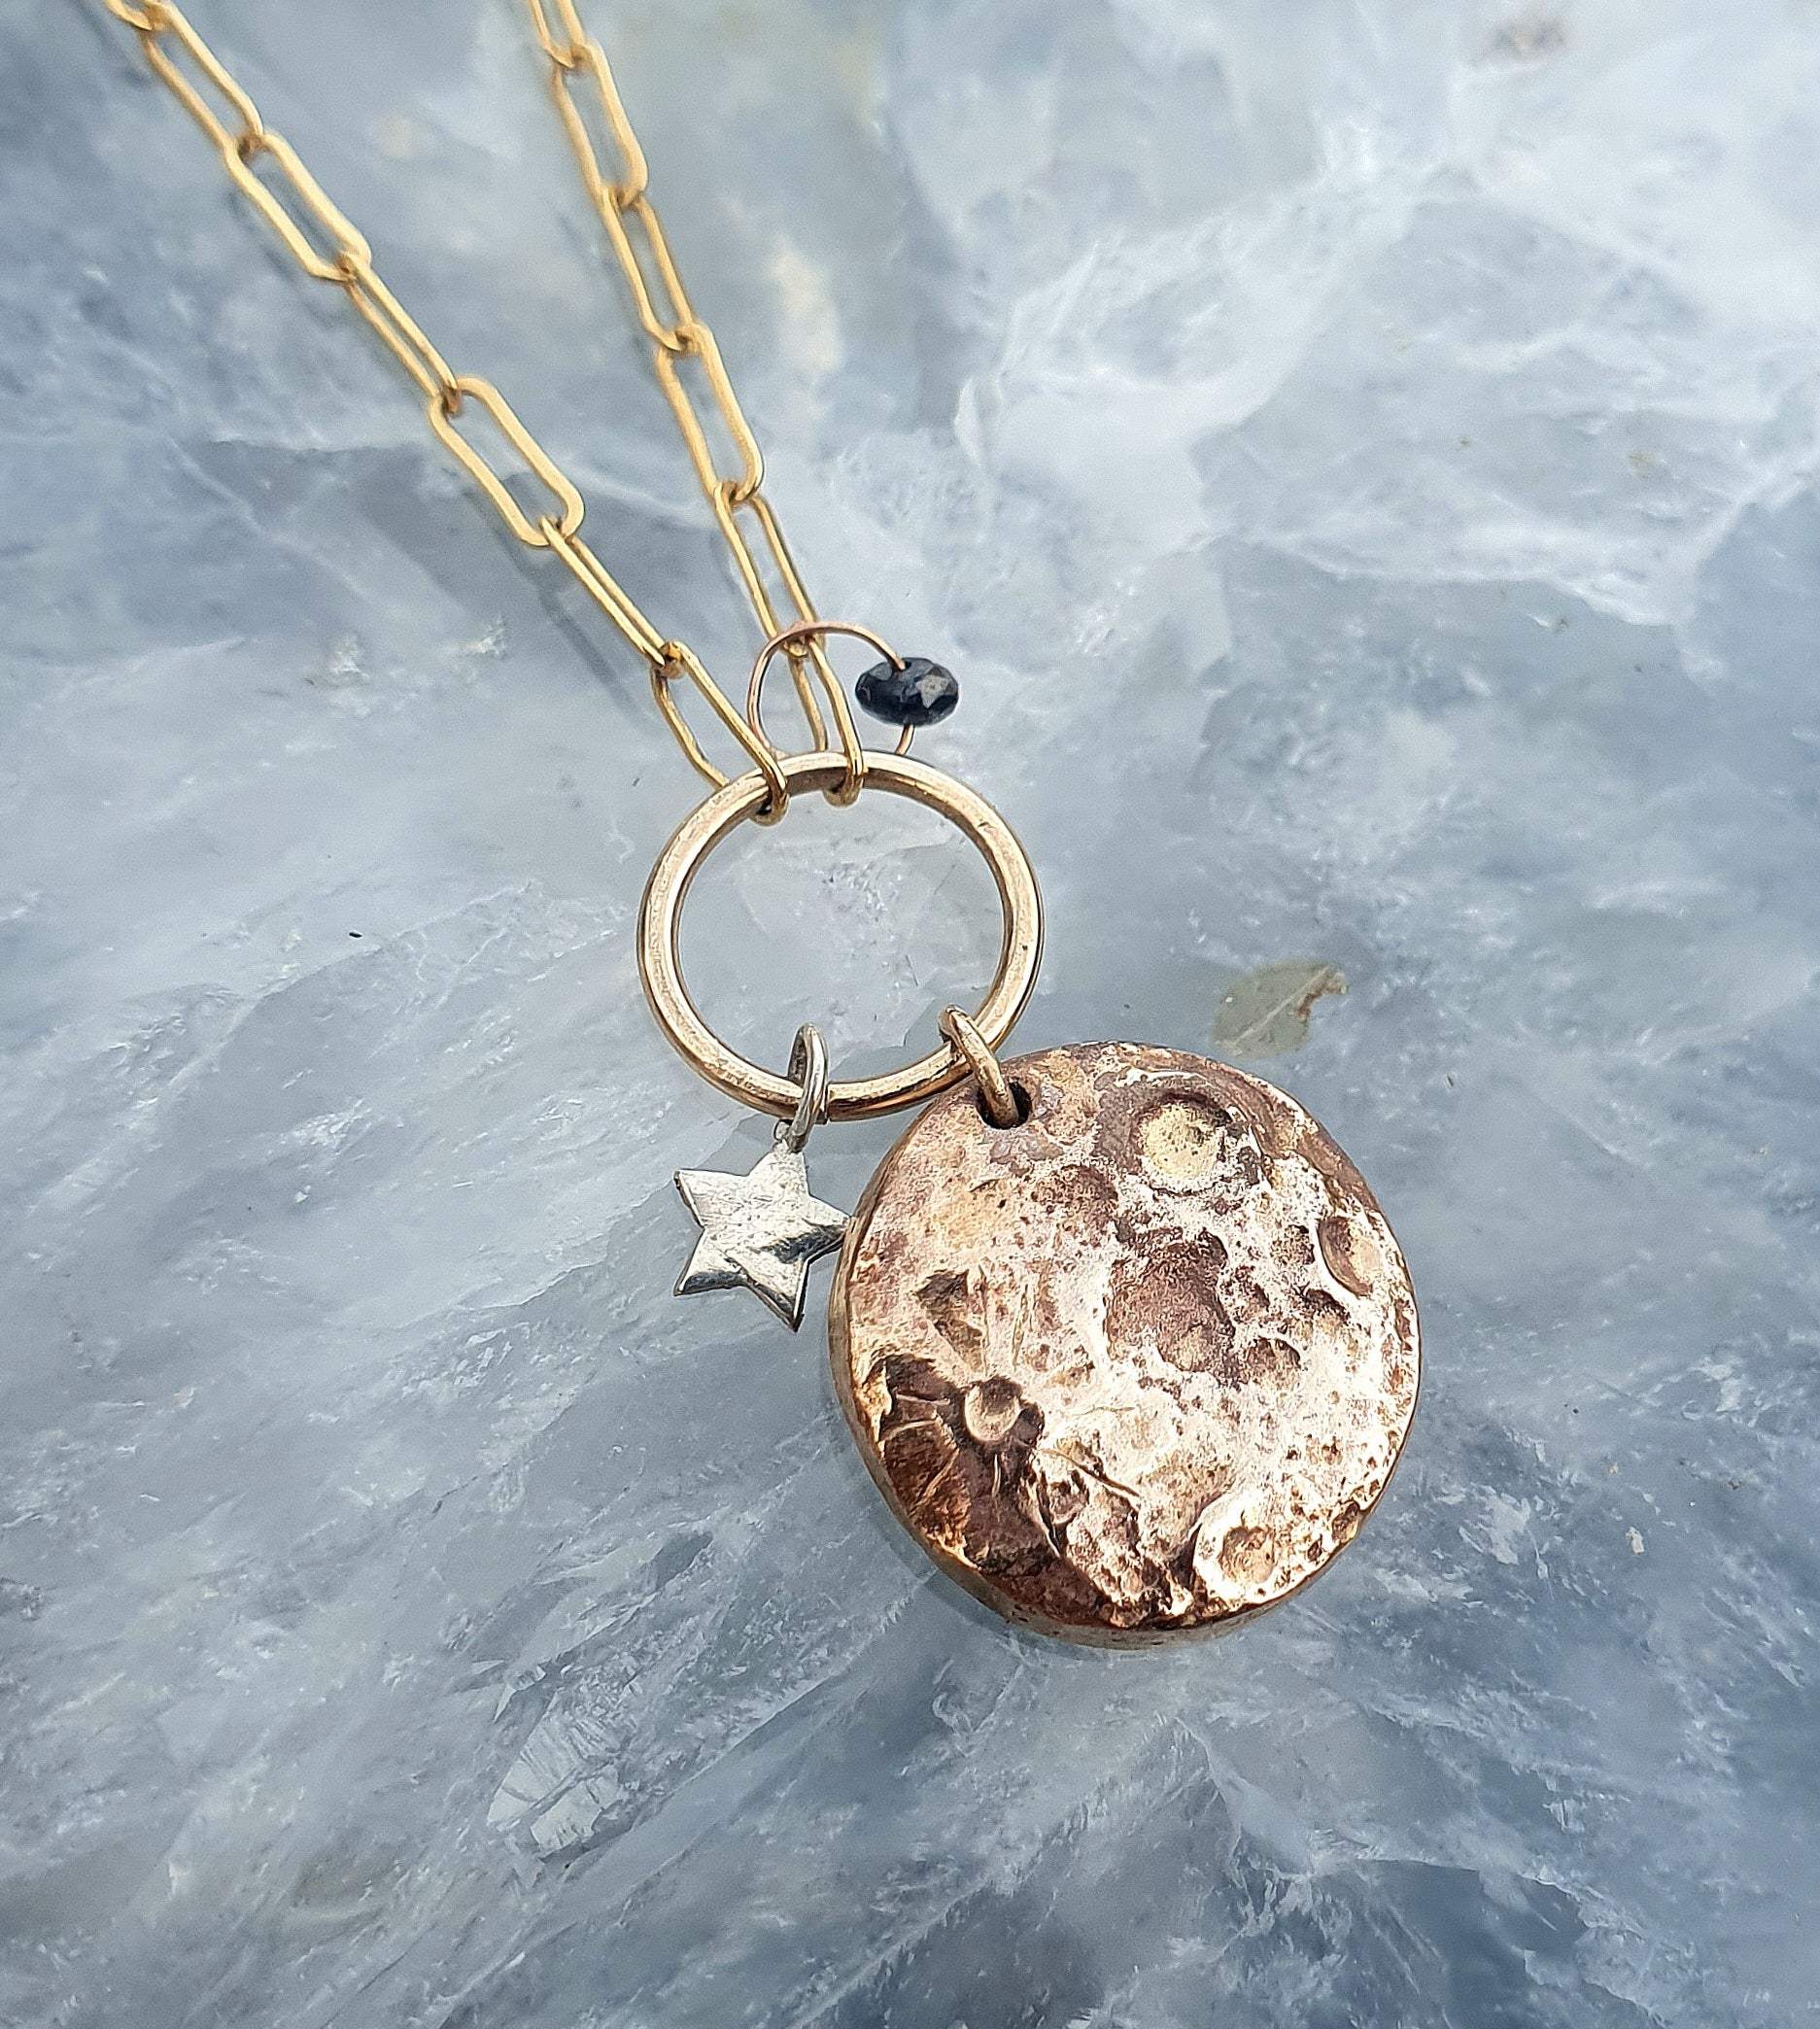 Molten Moon Necklace - gold filled necklace, bronze moon, silver star and black diamond bead